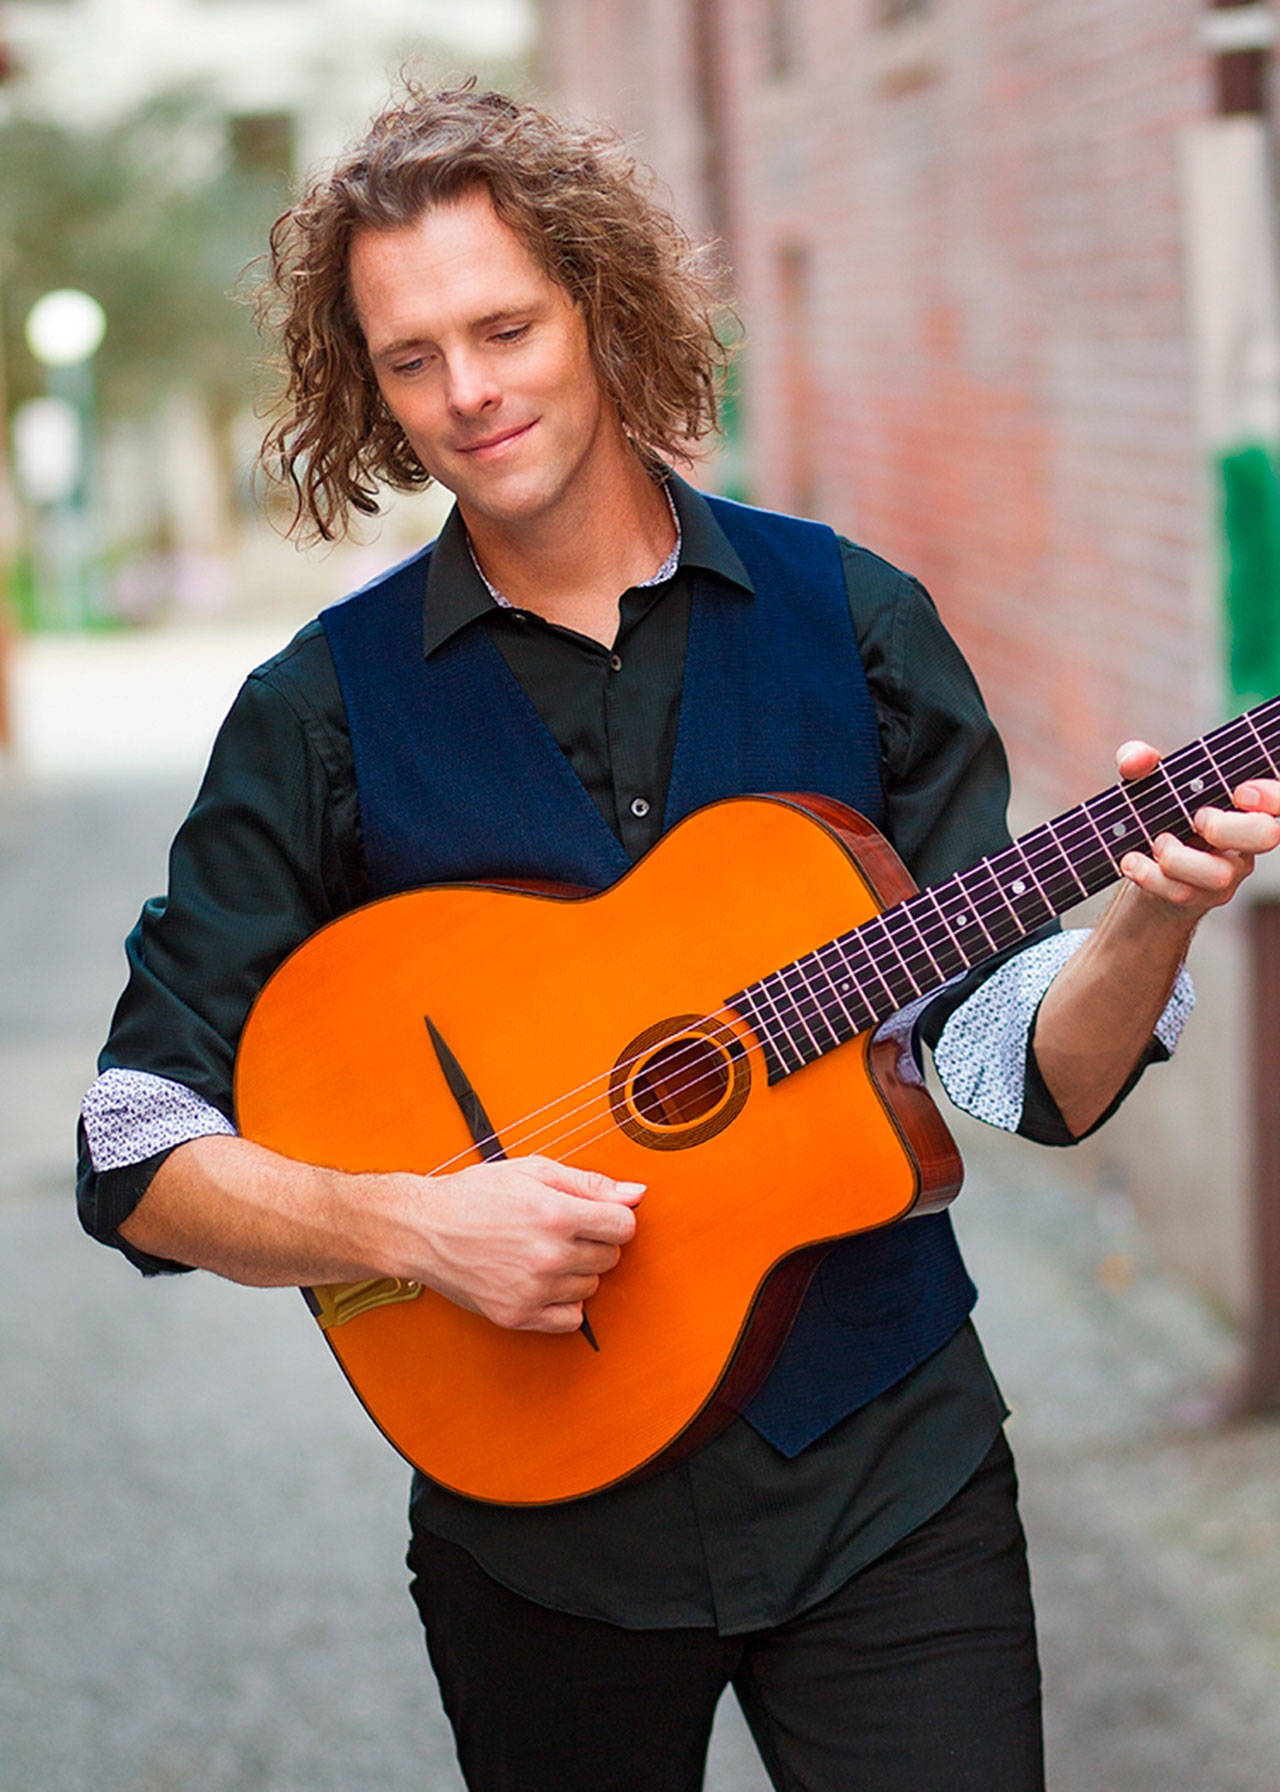 Photo courtesy of Ranger Sciacca | Perpetual Bainbridge Island stage mainstays Ranger and the Re-Arrangers will perform, with special guest Roch Lockyer (pictured), at 7 p.m. Friday, May 10 at the Bainbridge Island Museum of Art.